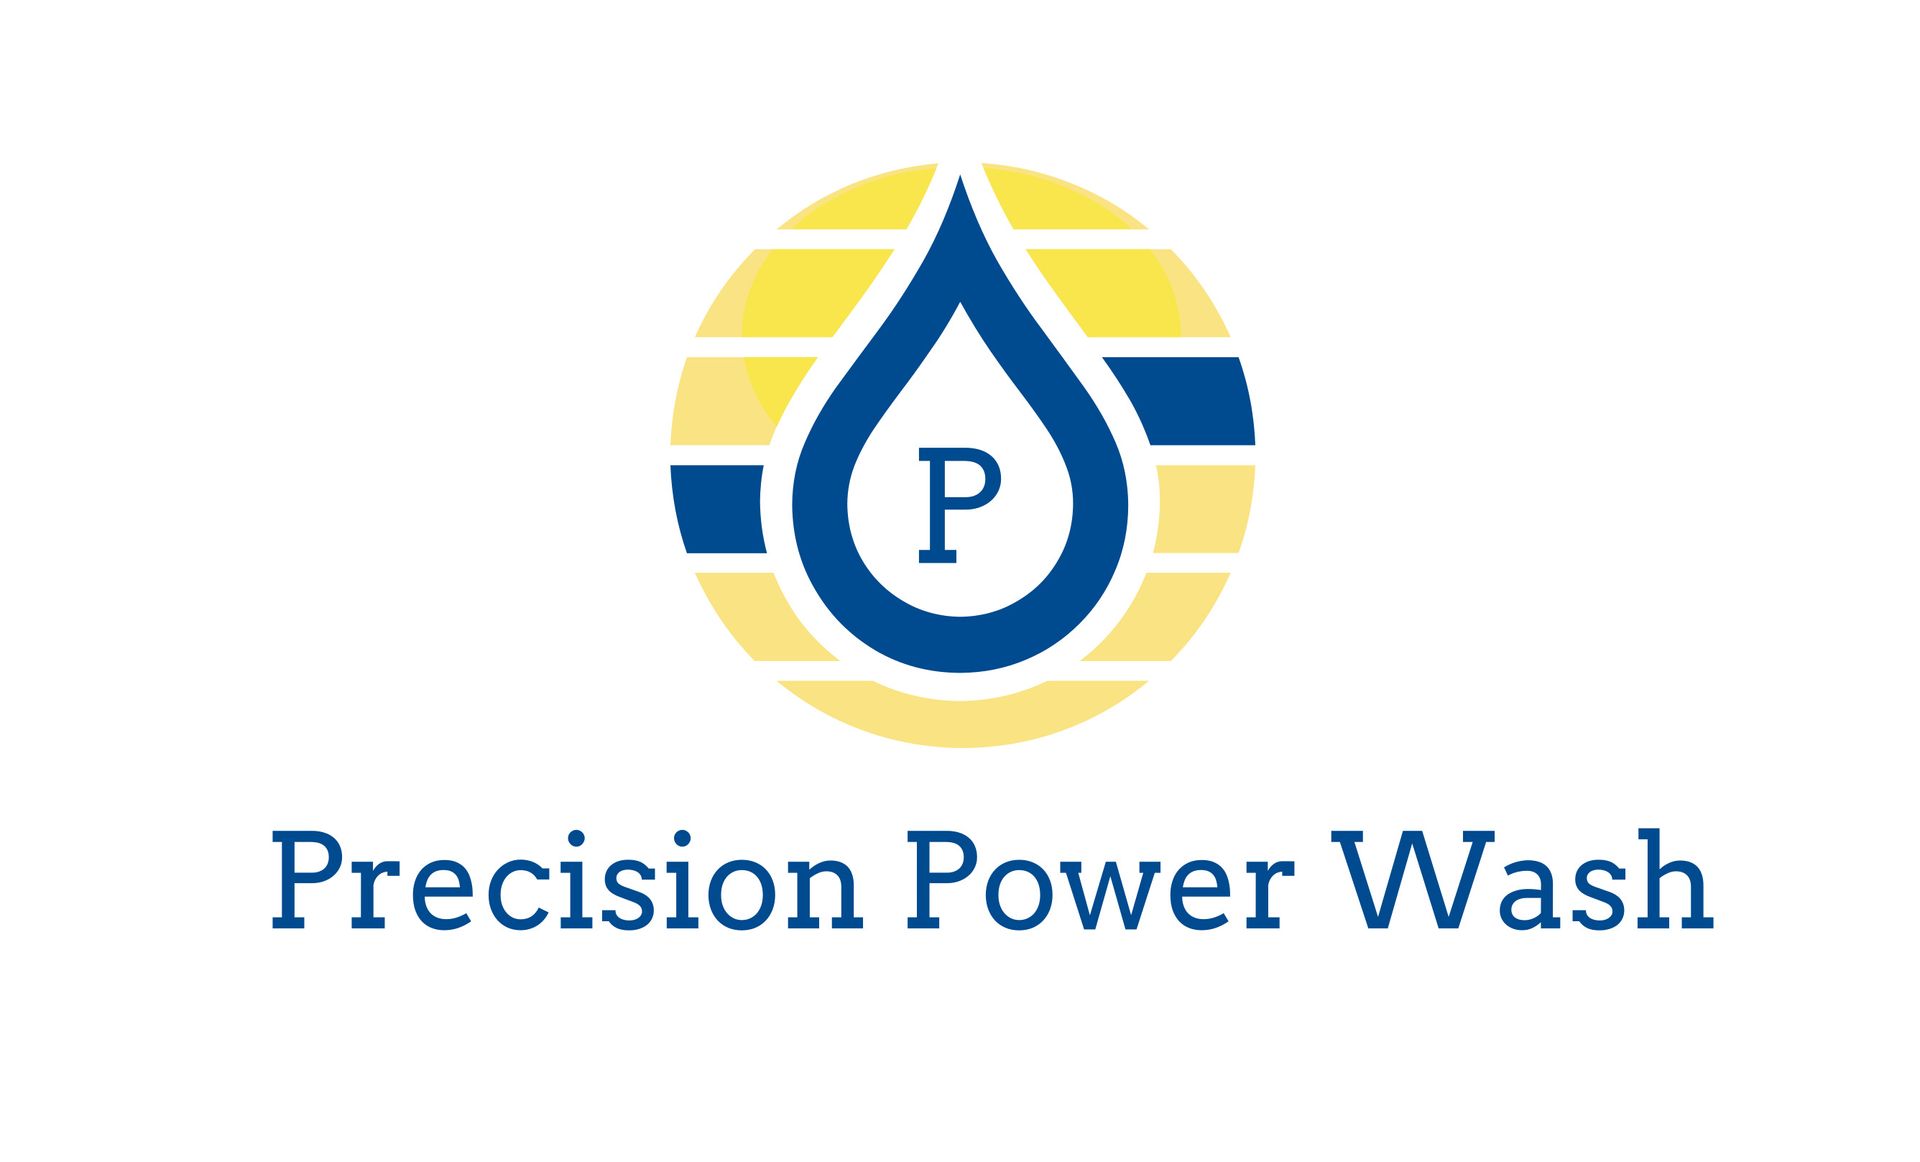 A blue and yellow logo for precision power wash